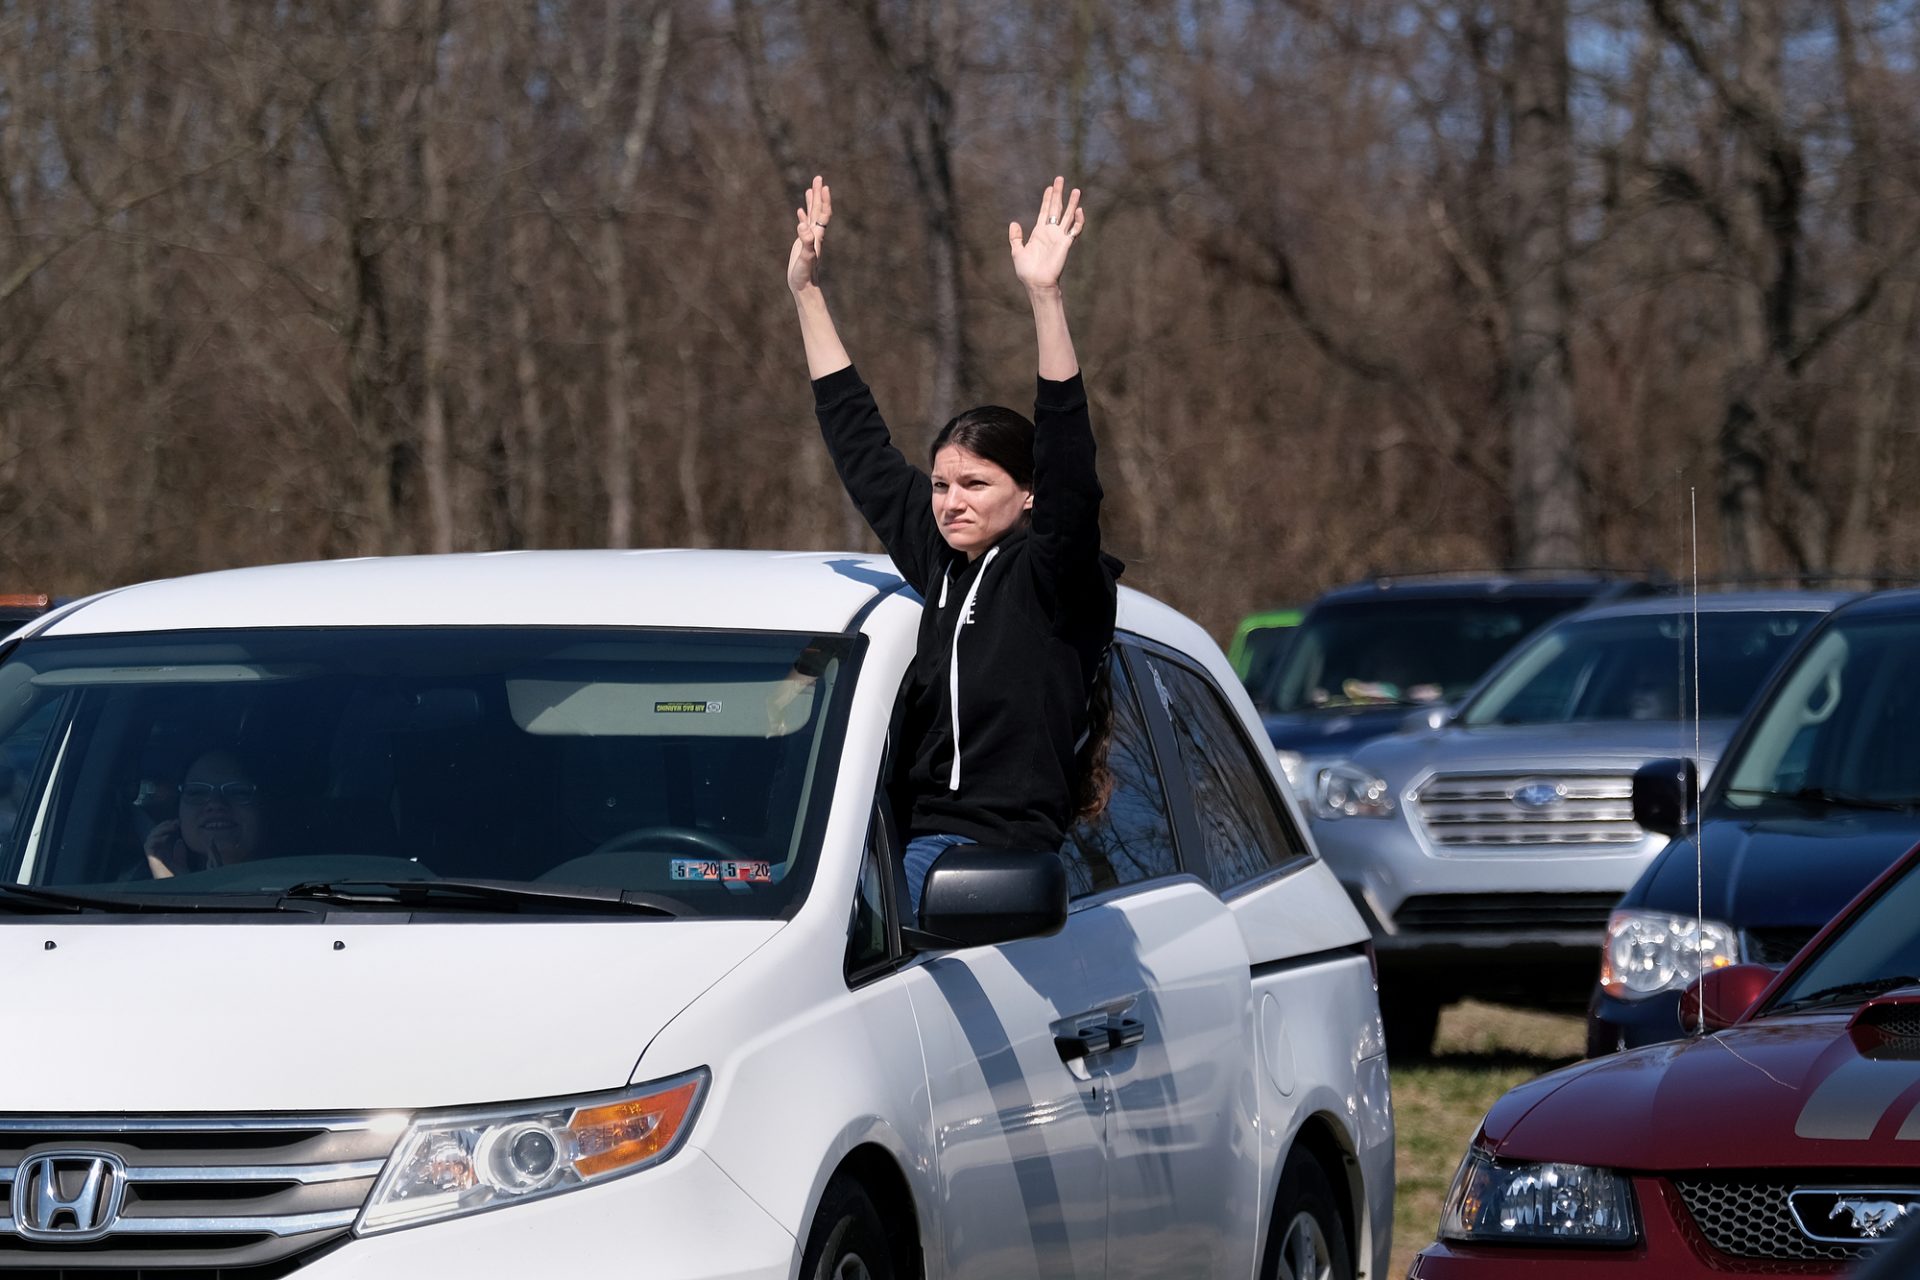 A parishioner during Bethany Wesleyan Church's Sunday worship service at Becky's Drive-In in Walnutport, Pennsylvania.